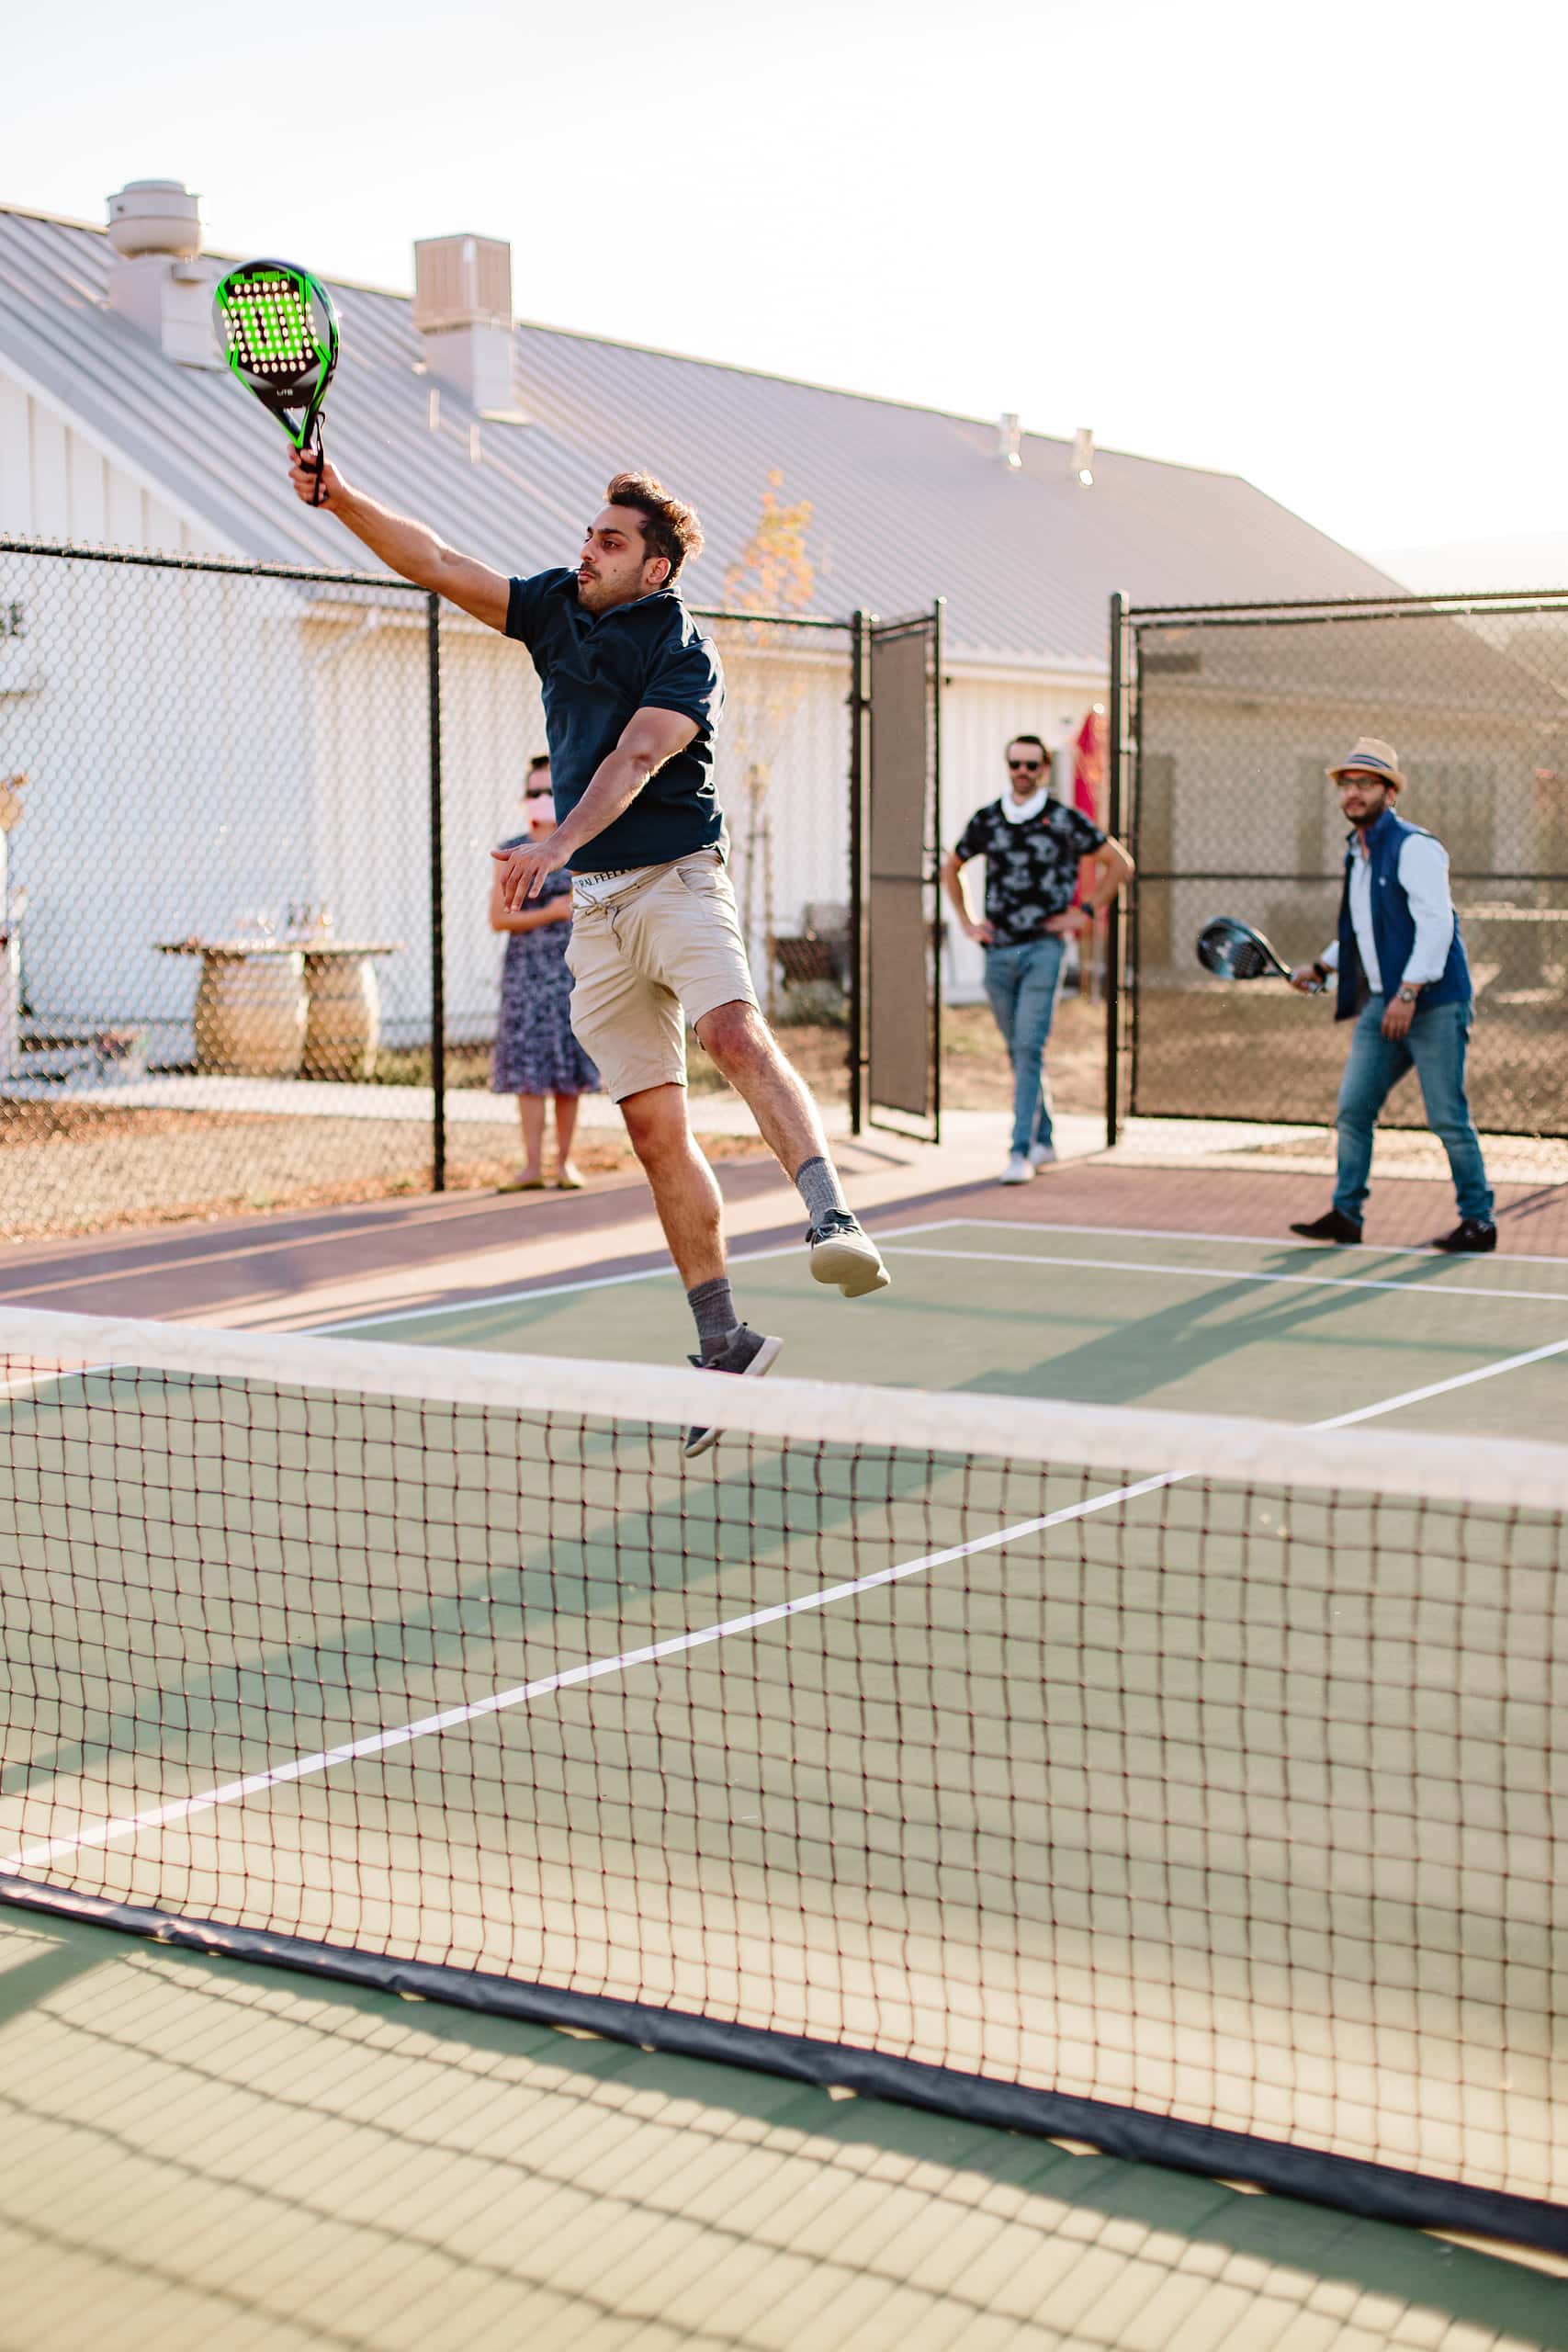 A group of friends on the pickleball court, a man jumping to hit the ball in the foreground, his friends blurred in the background. 